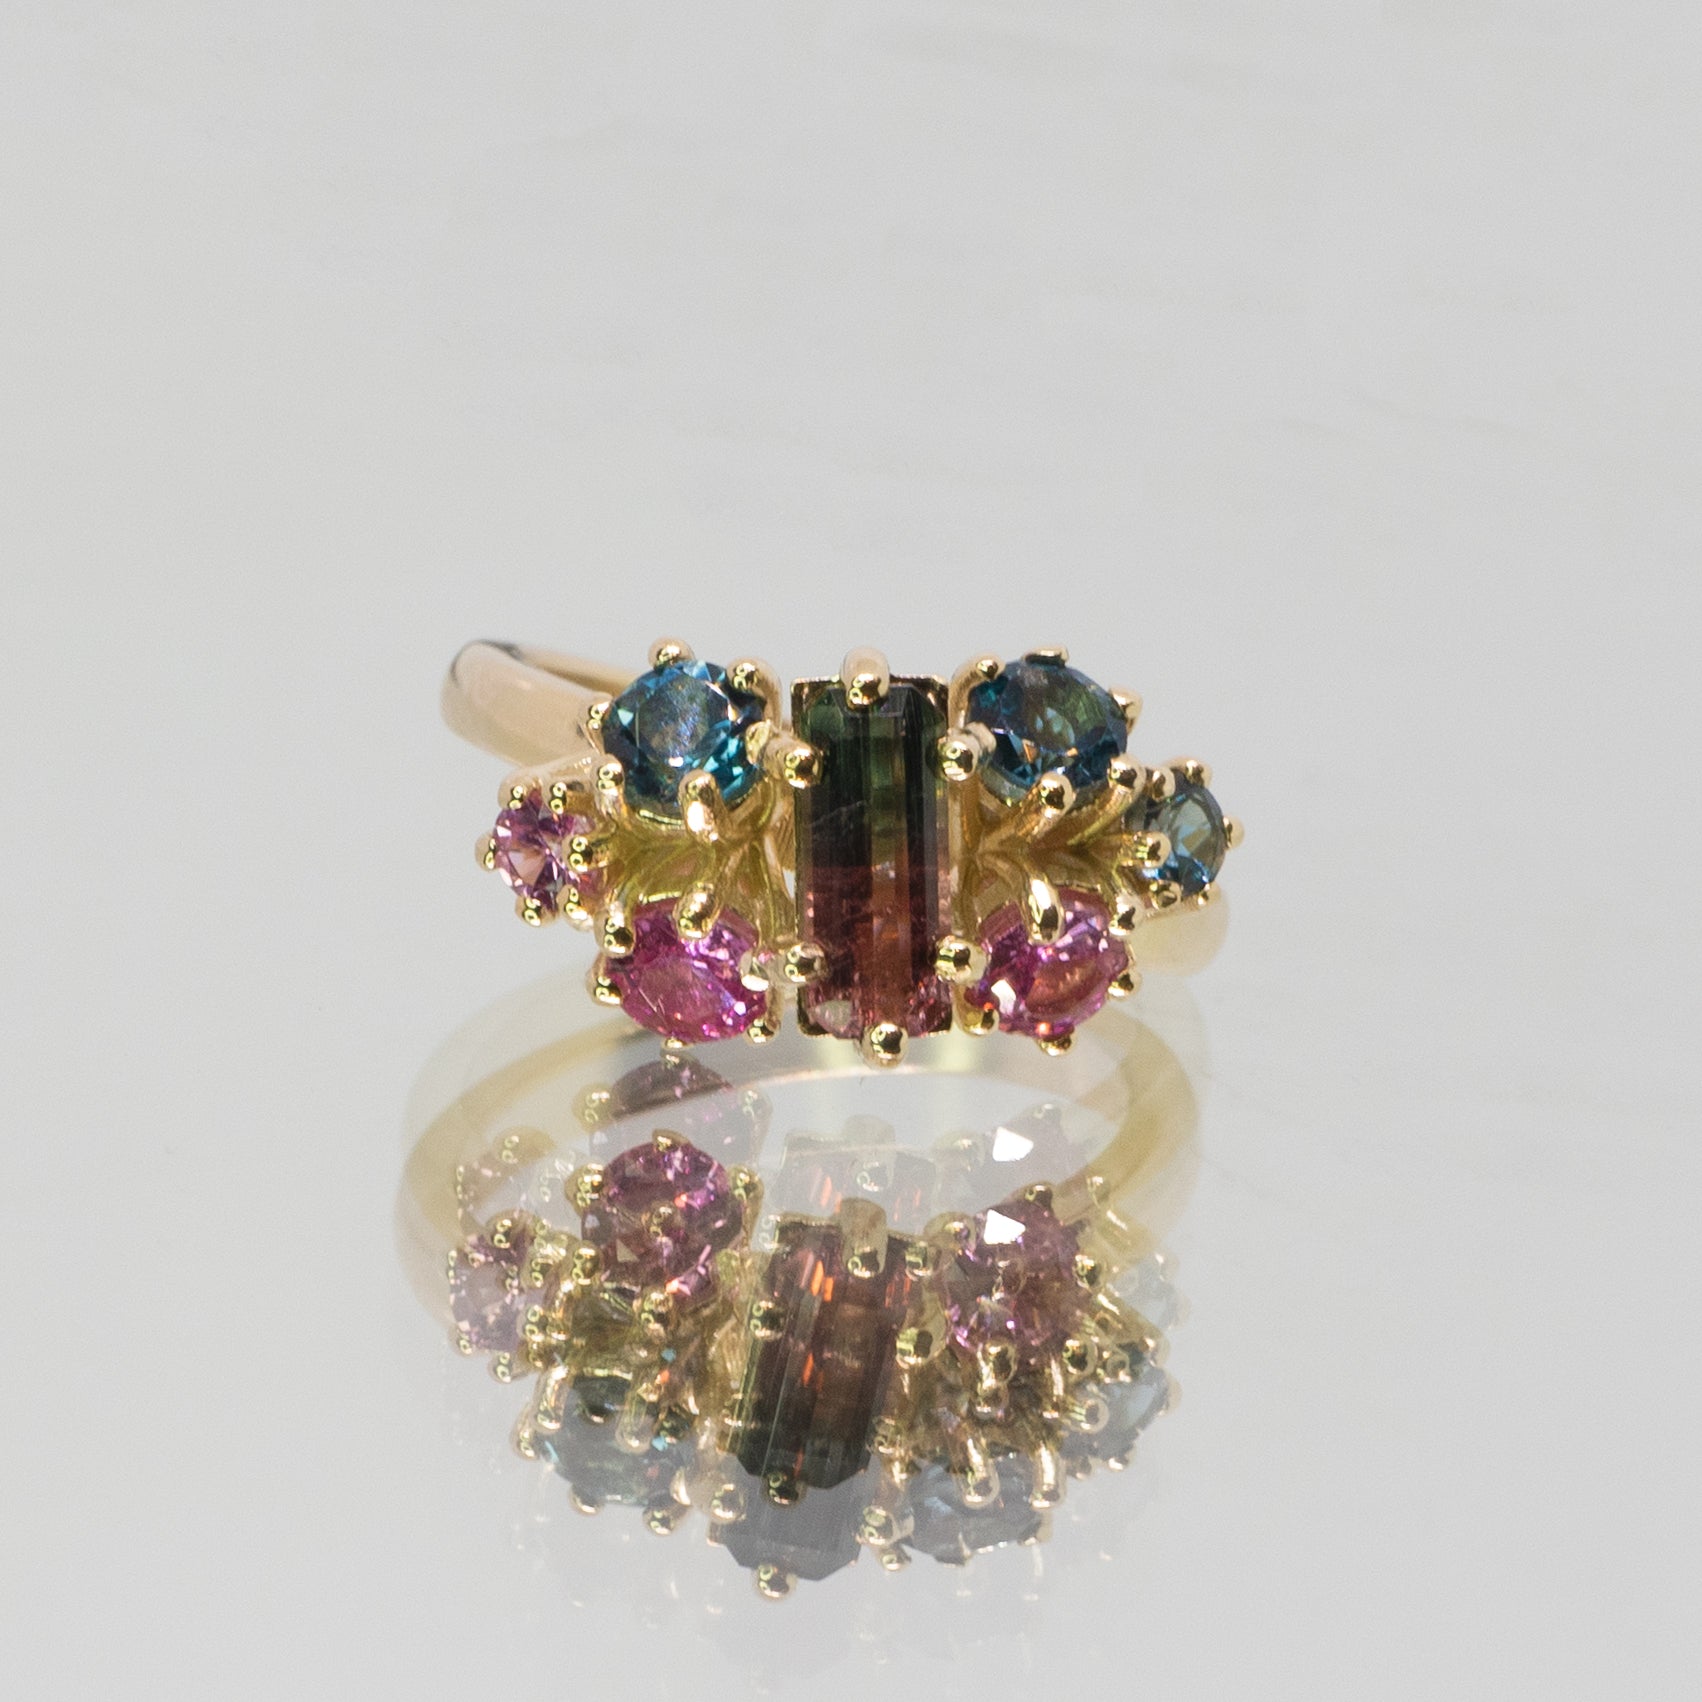 Bespoke -  Cluster ring with Blue and Pink Tourmaline with pink tourmaline and topaz